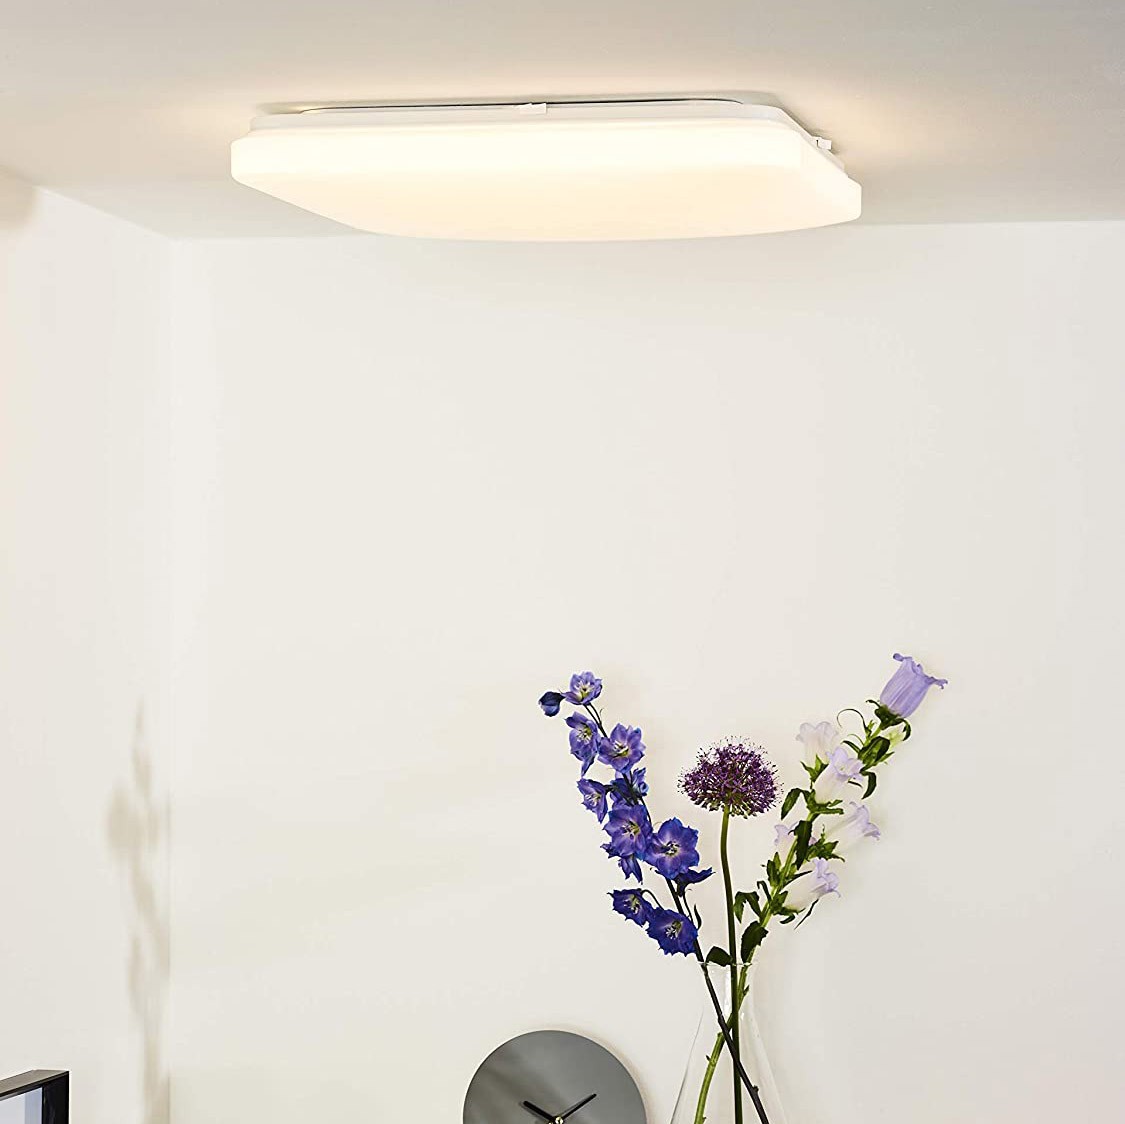 69,95 € Free Shipping | Indoor ceiling light 42W Ø 43 cm. LED Pmma. White Color